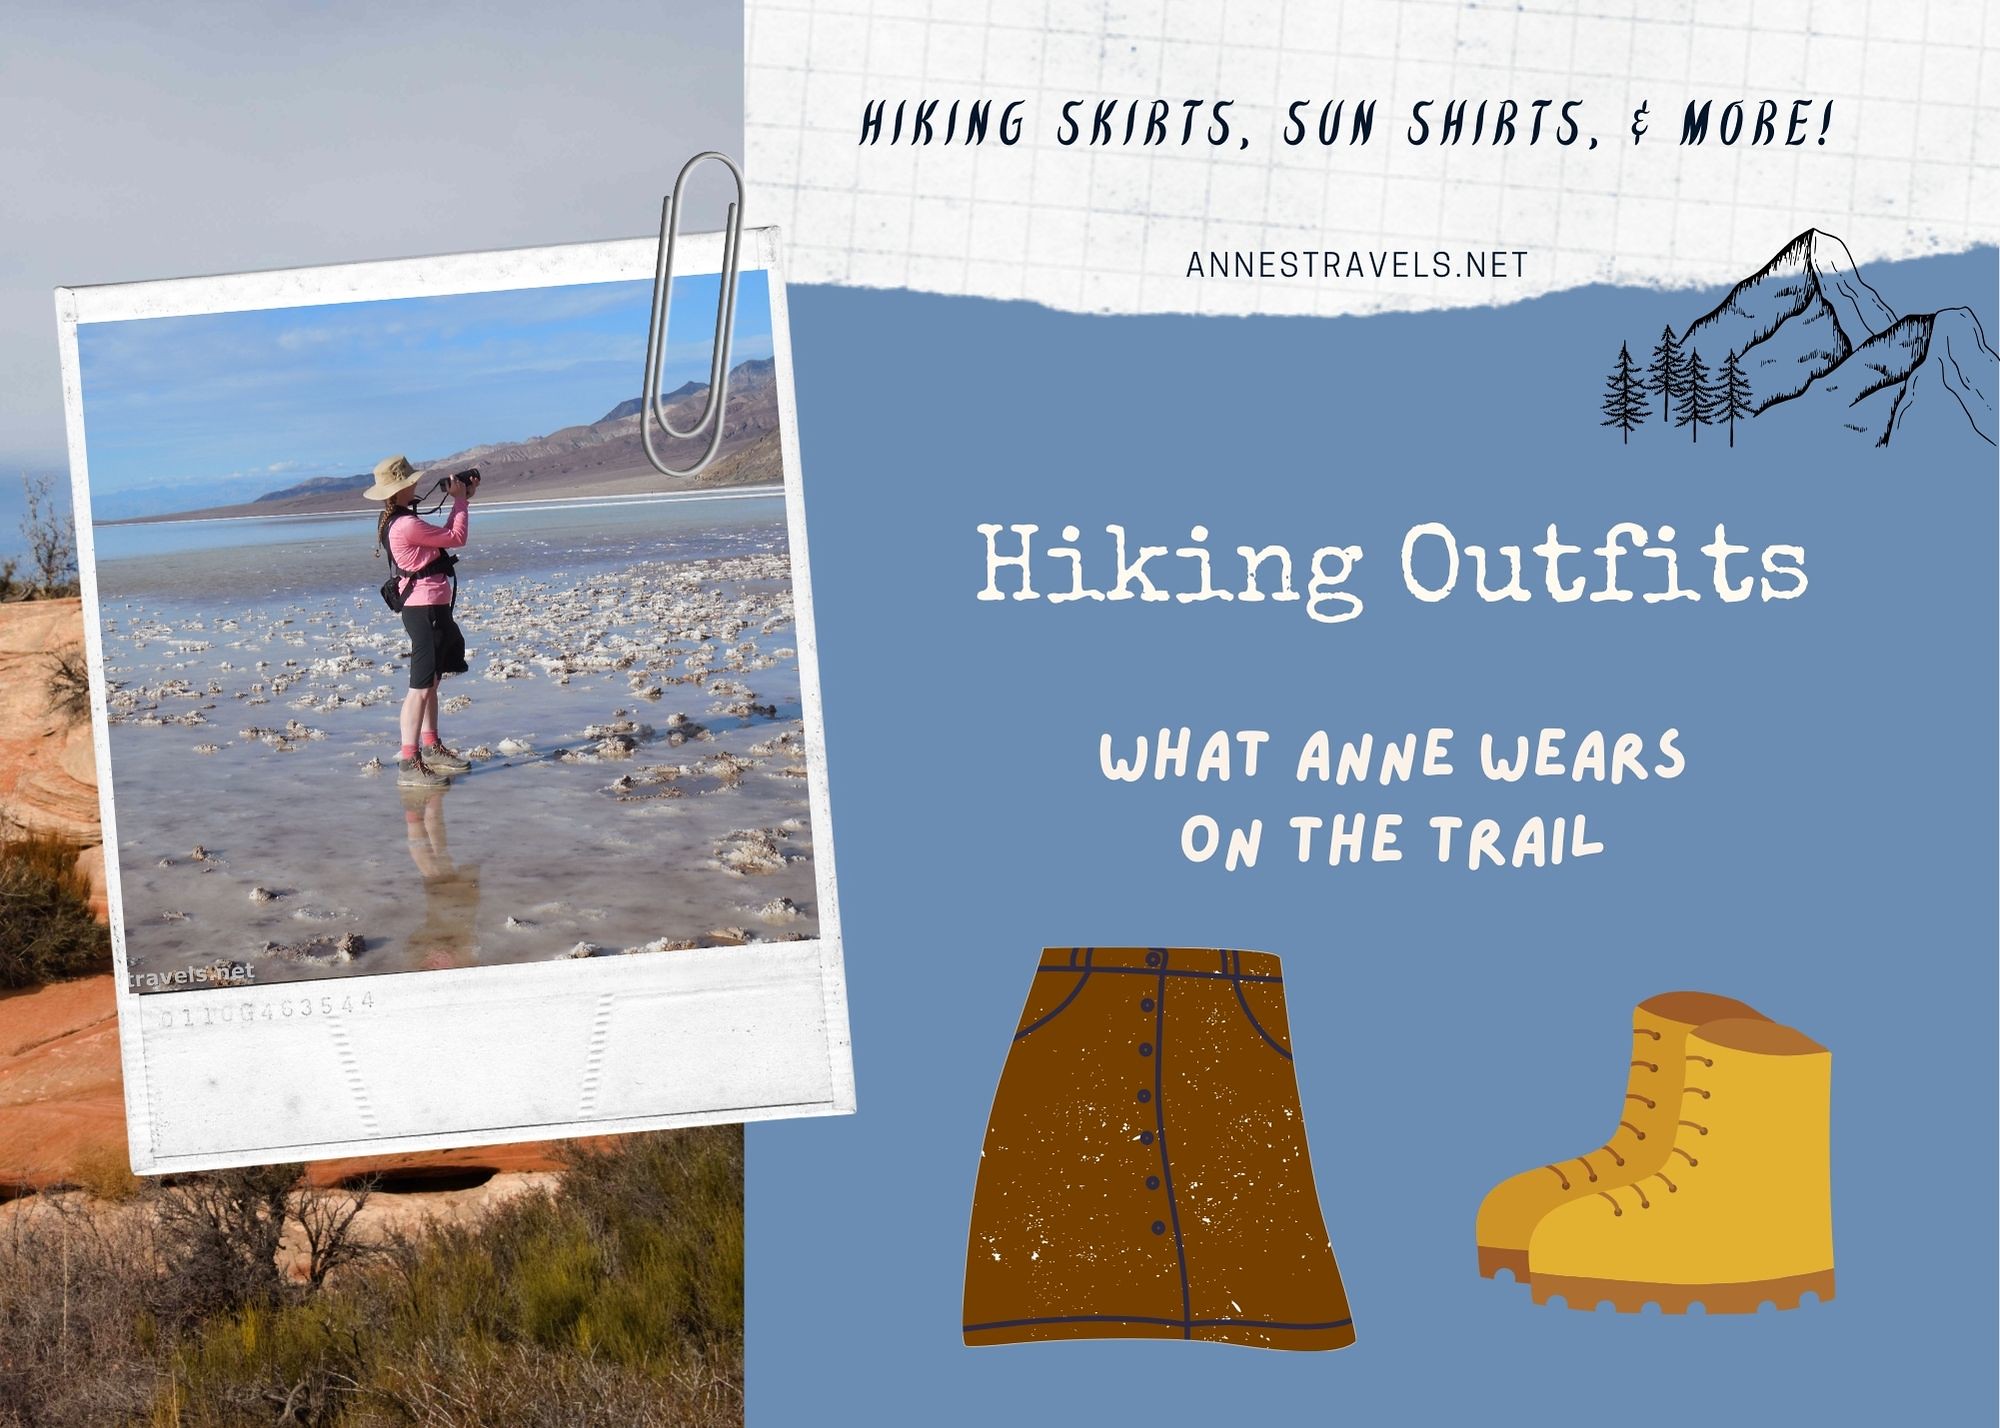 What hiking clothing Anne wears on the trail